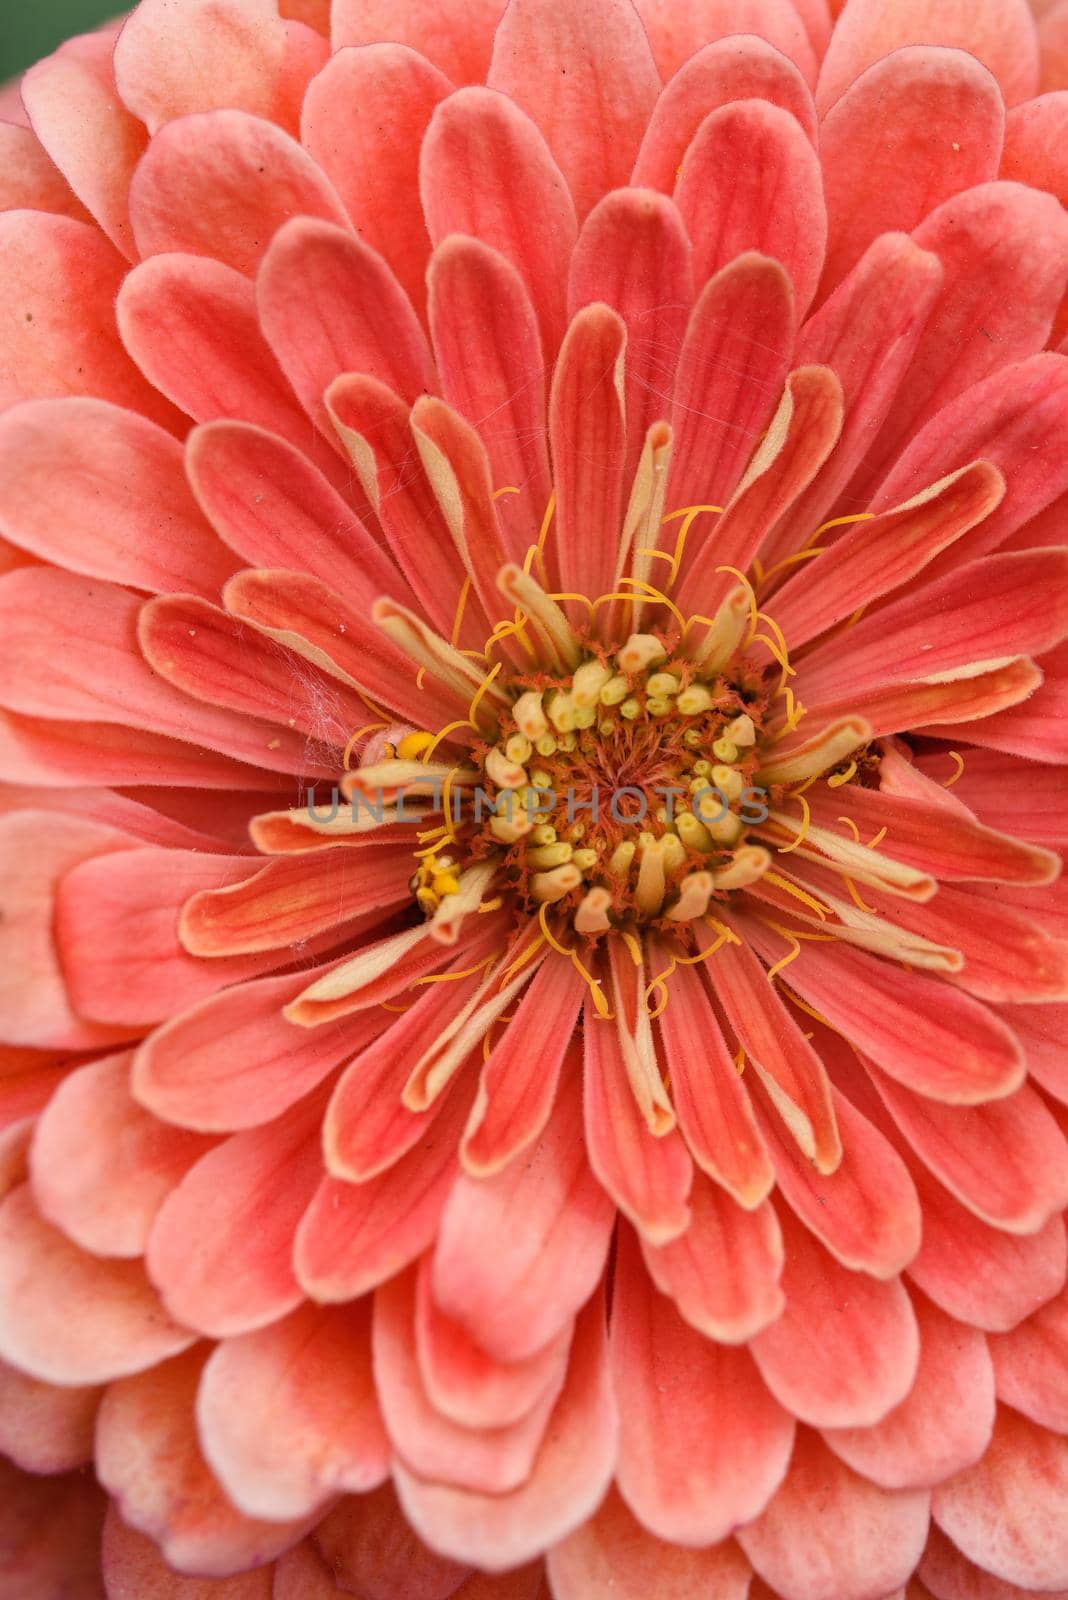 A flower bud of zinnia close-up in the garden at the end of summer.